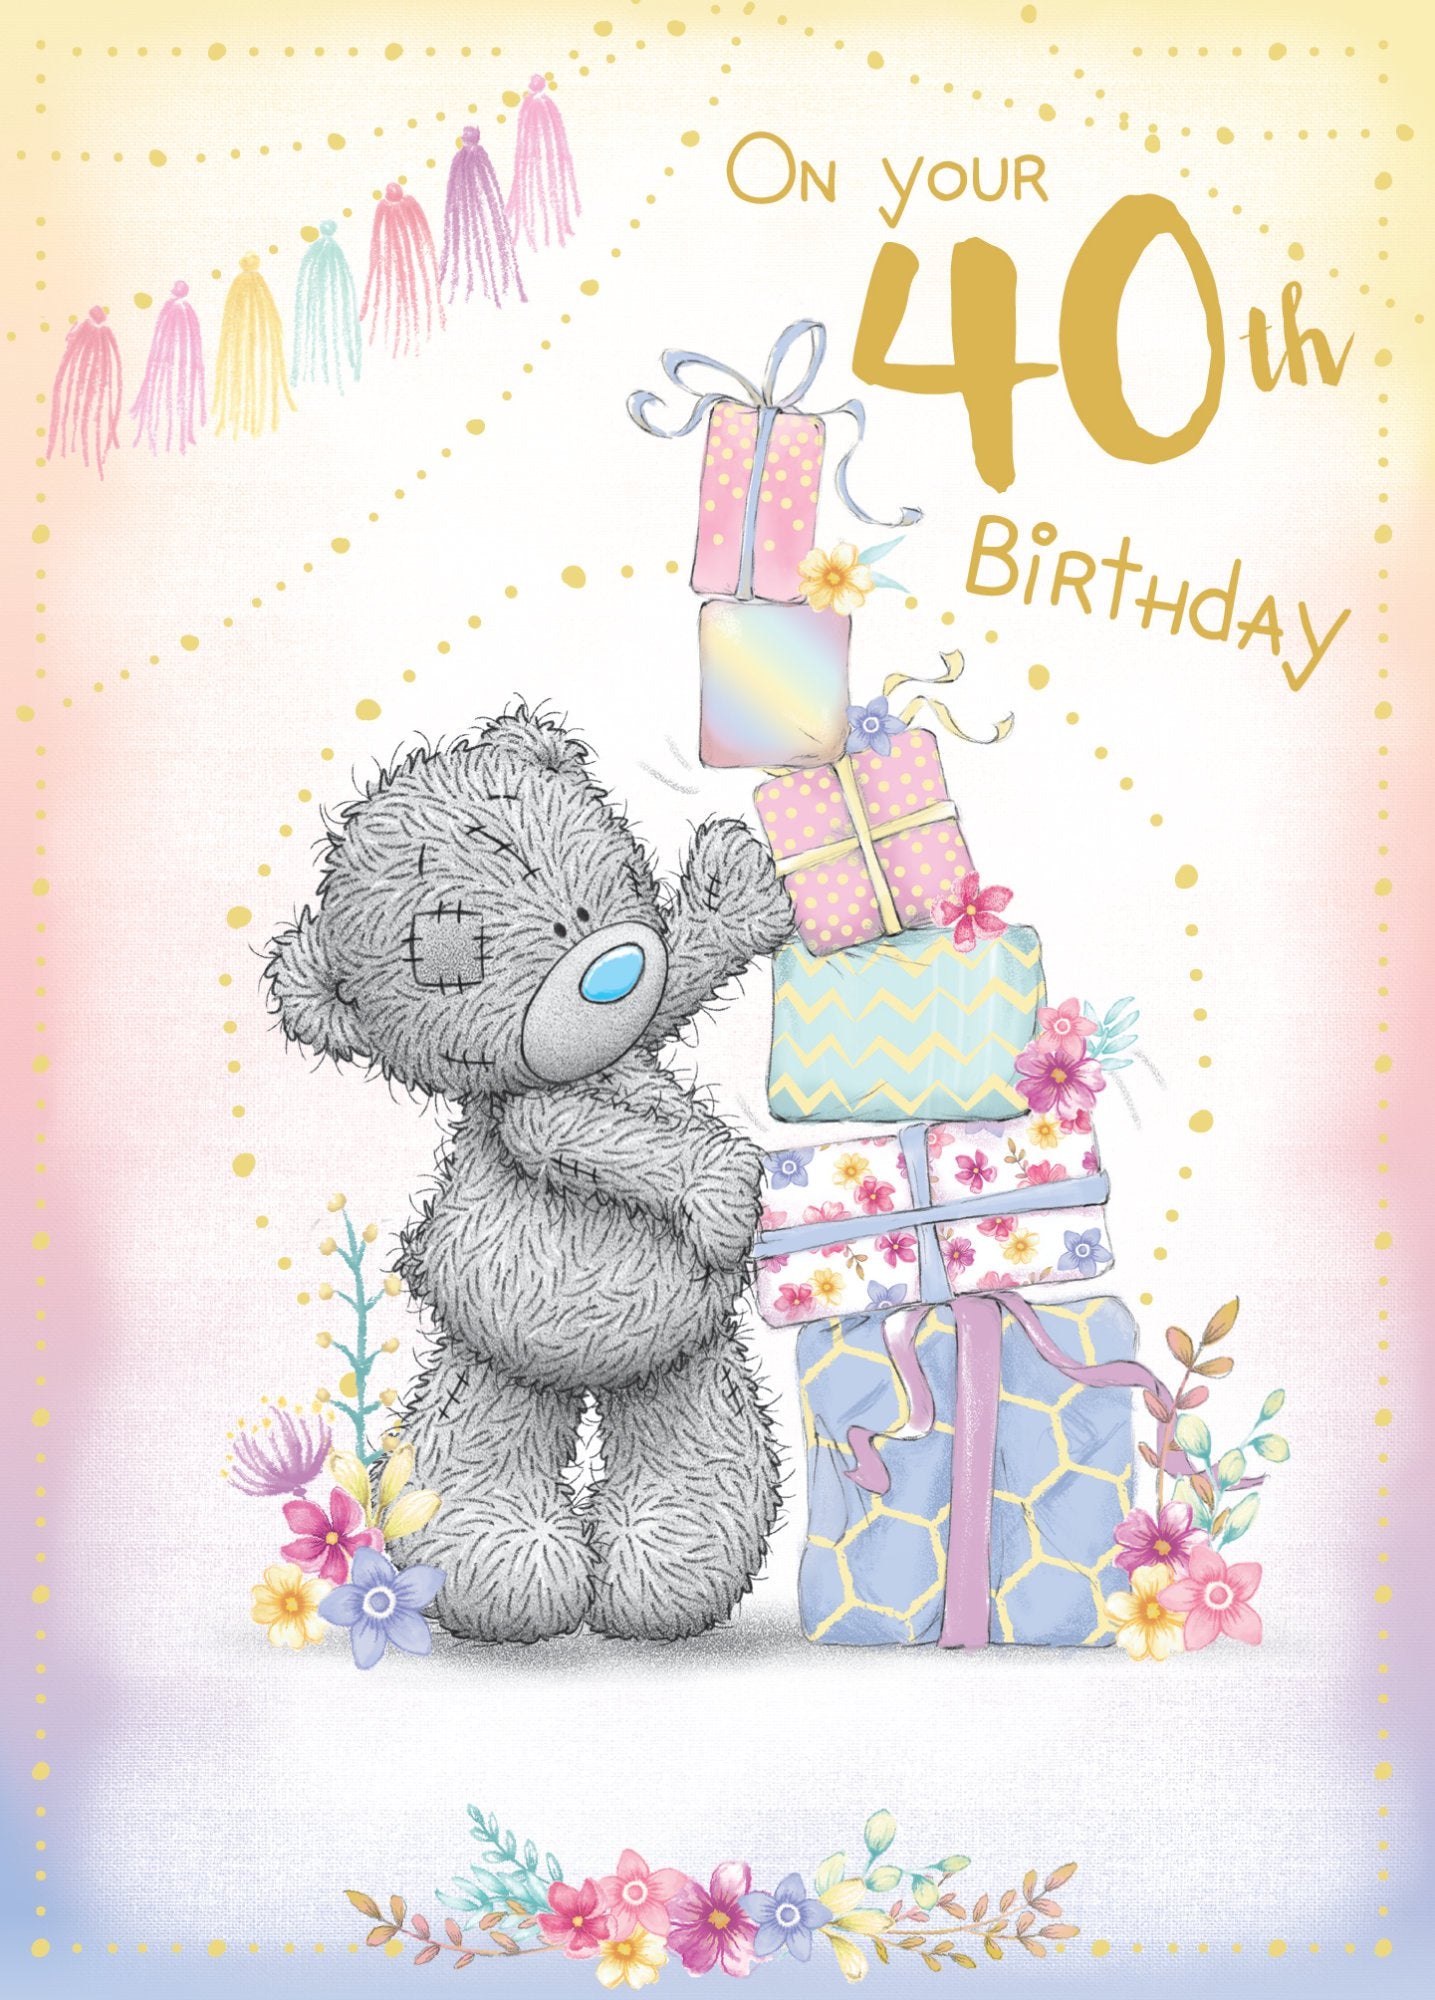 Photograph of 40th Birthday Teddy Presents Greetings Card at Nicole's Shop